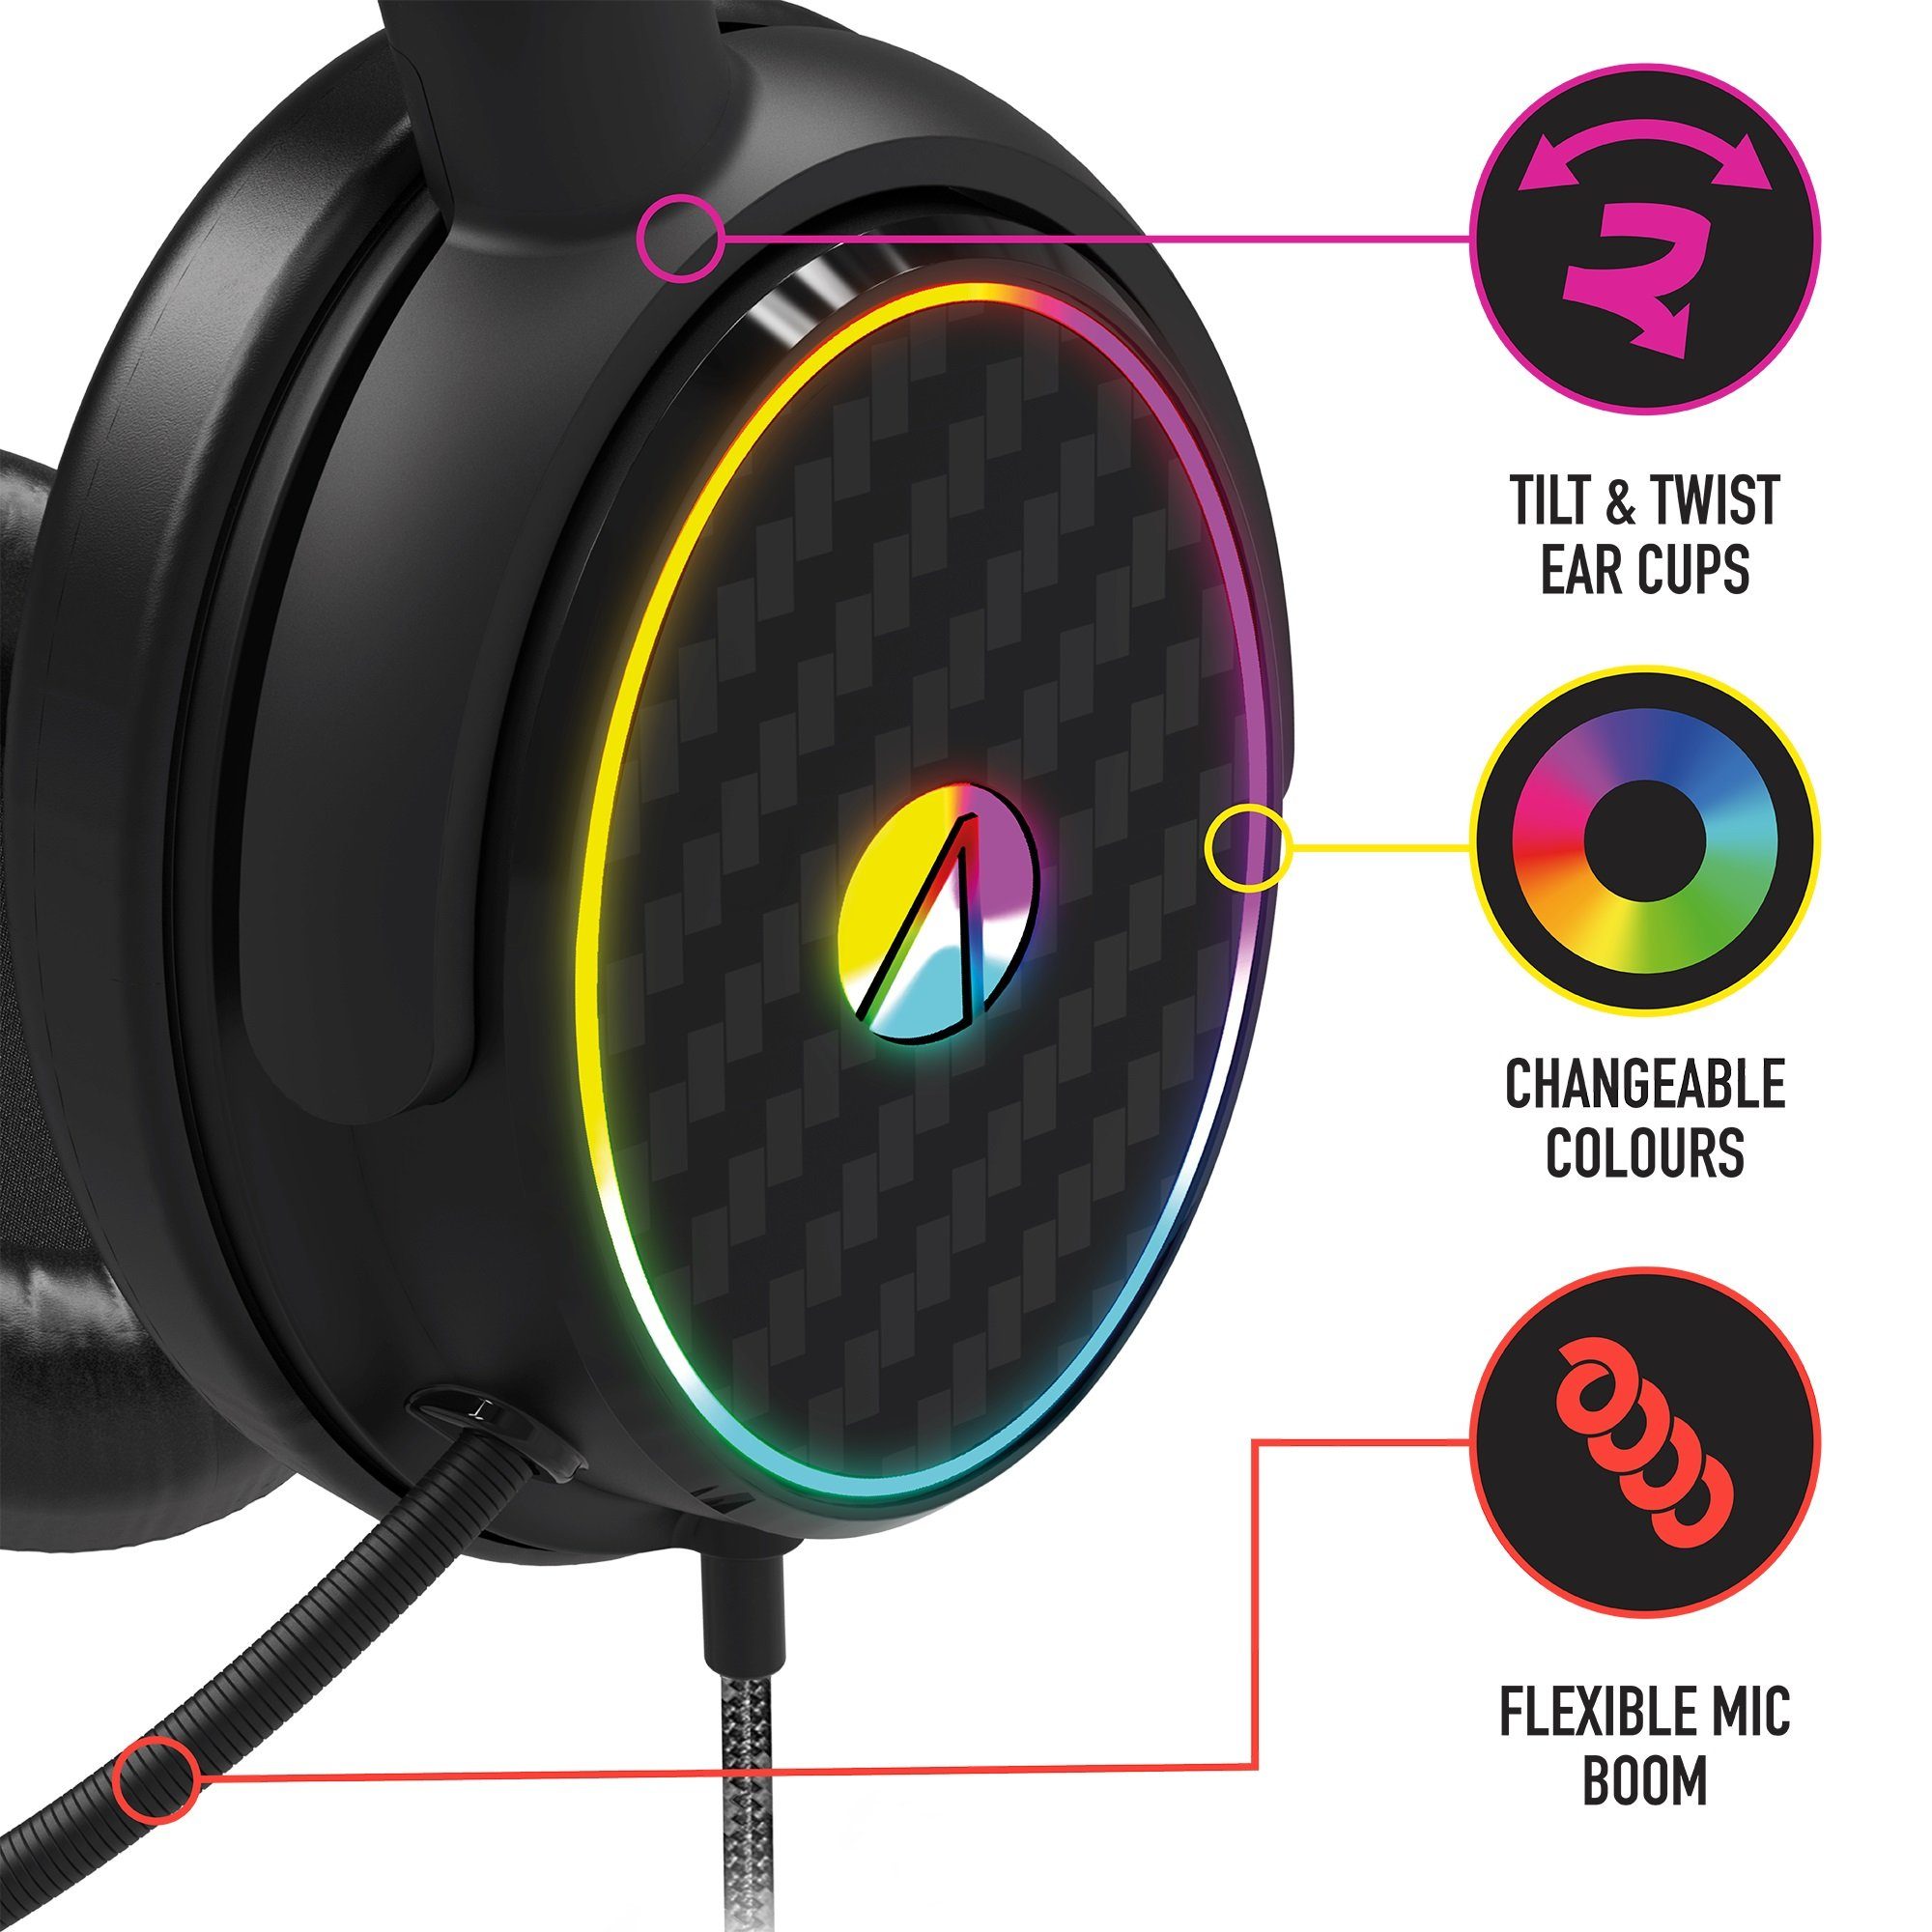 Stealth Stereo LED (Plastikfreie mit Verpackung) Headset Beleuchtung Gaming Gaming-Headset C6-100